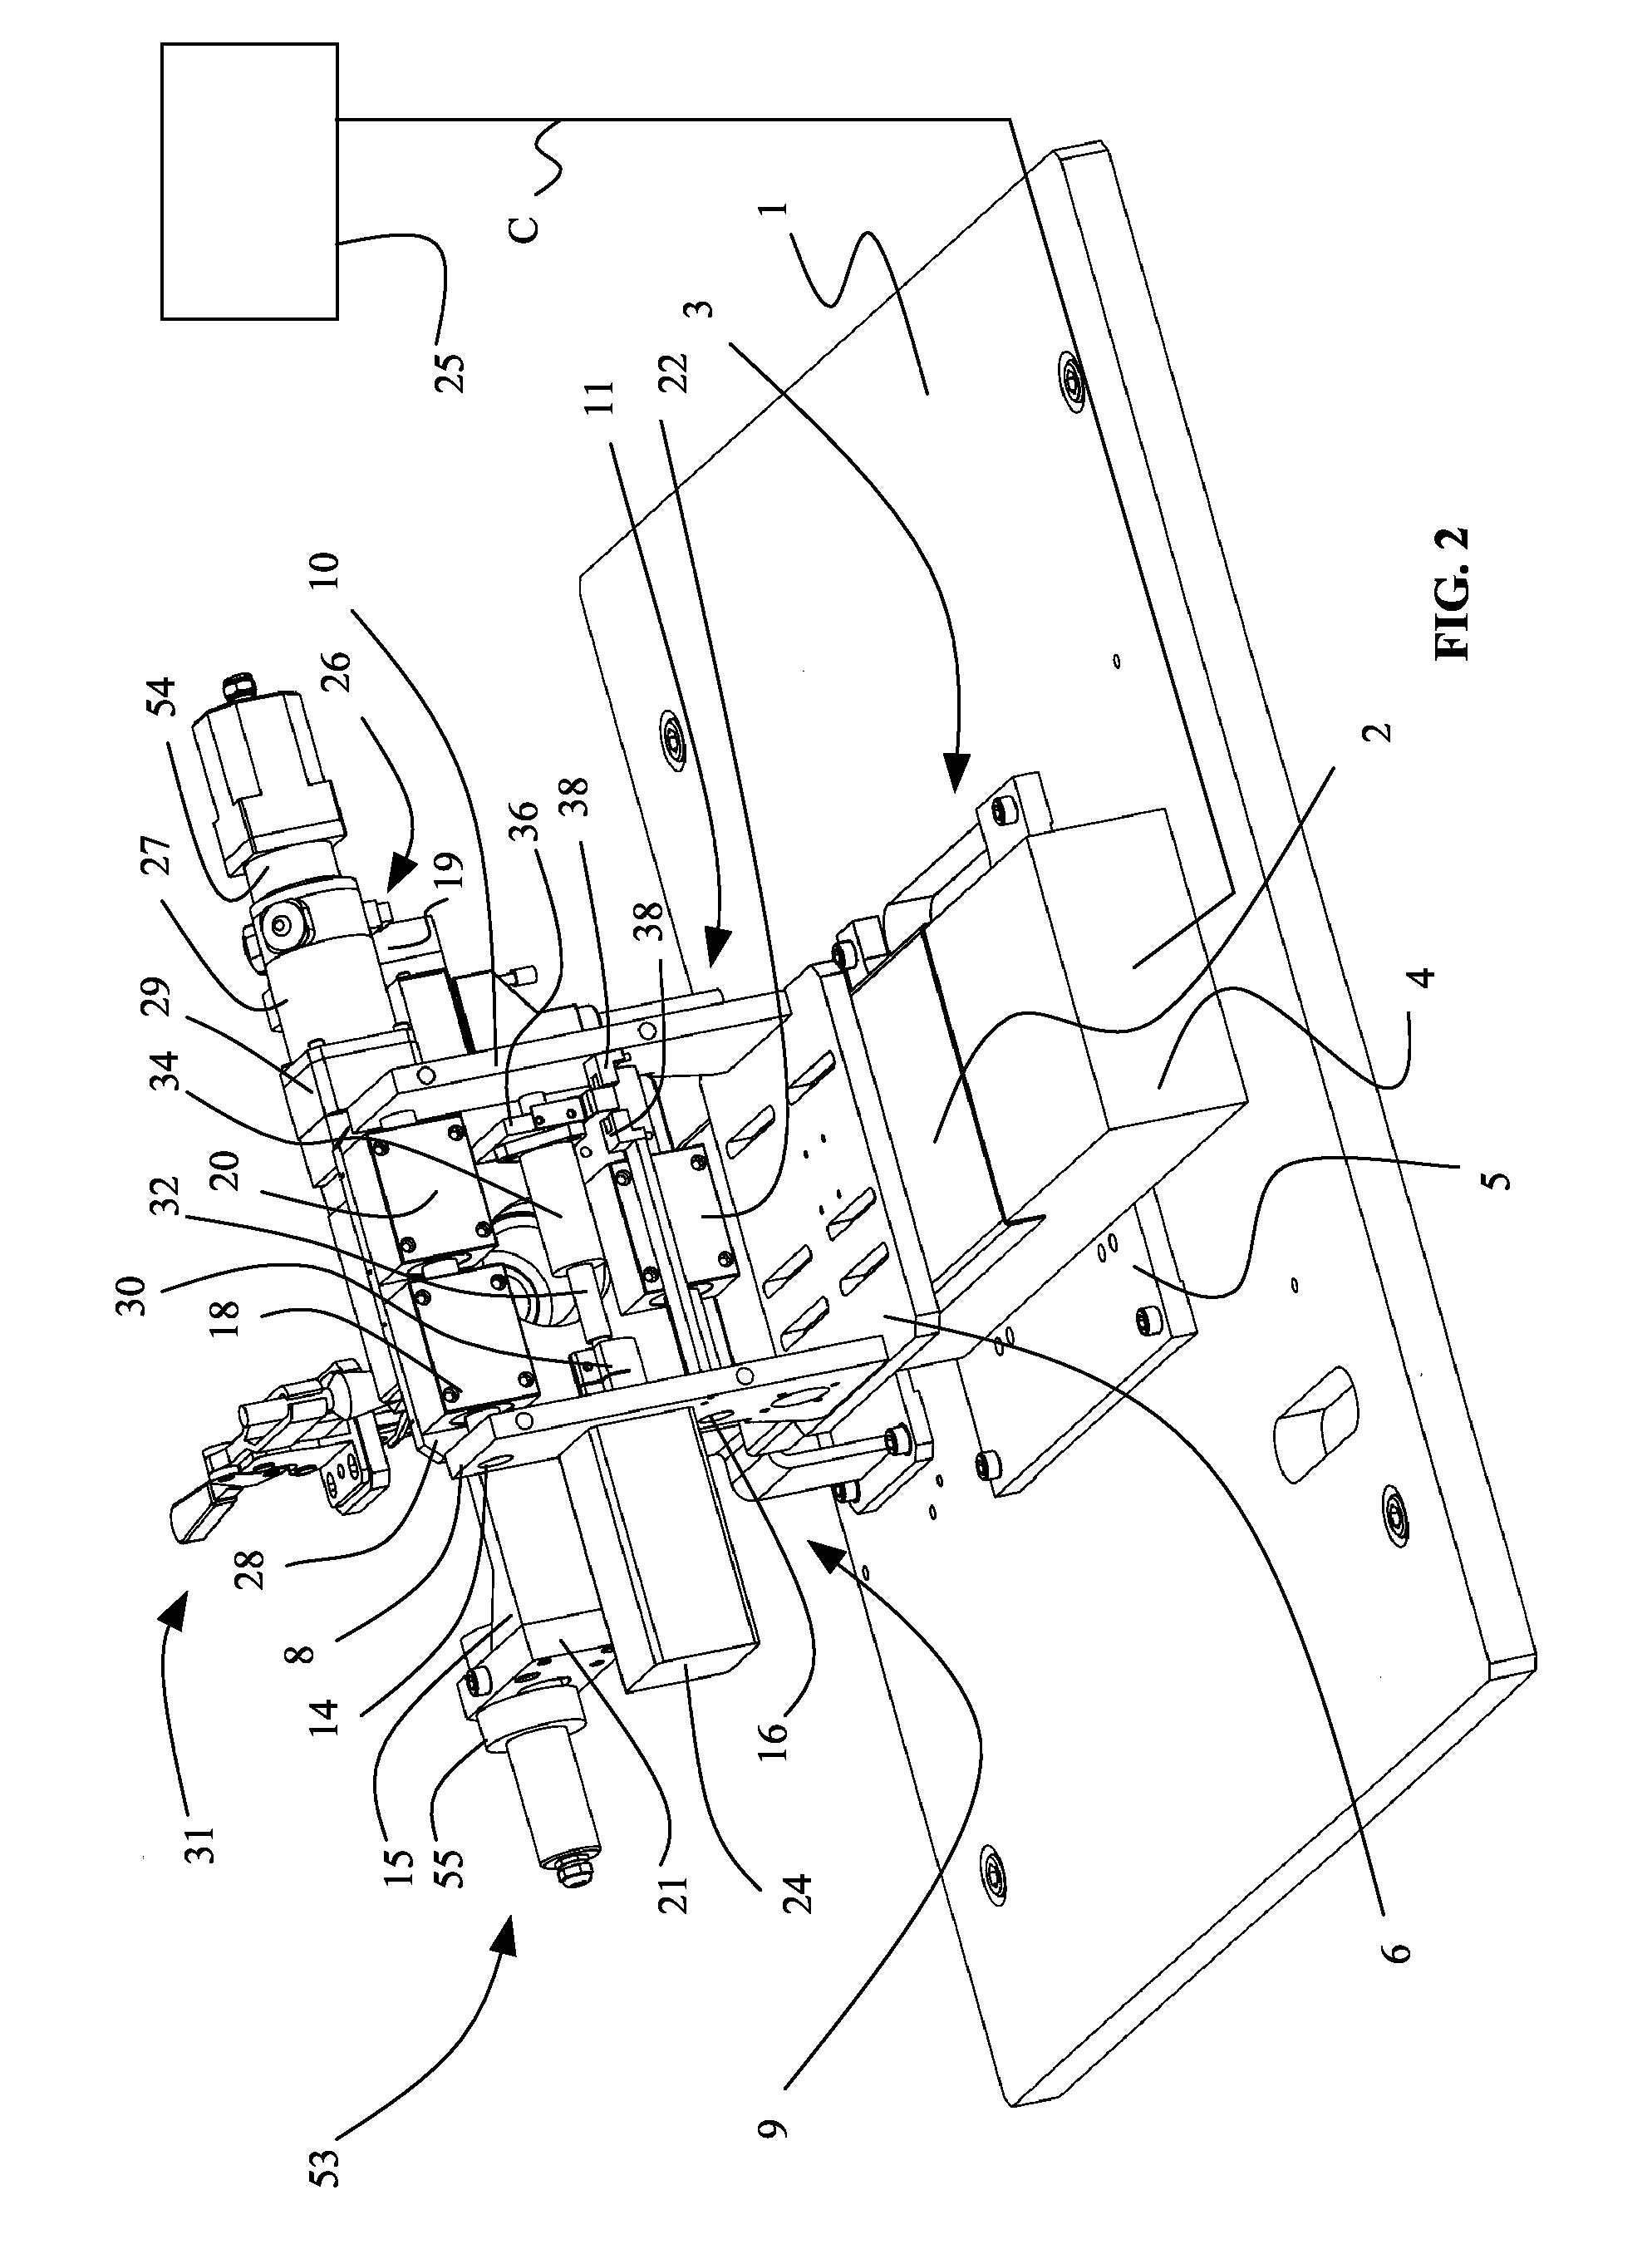 Apparatus and Method For Checking Position and/or Shape of Mechanical Pieces